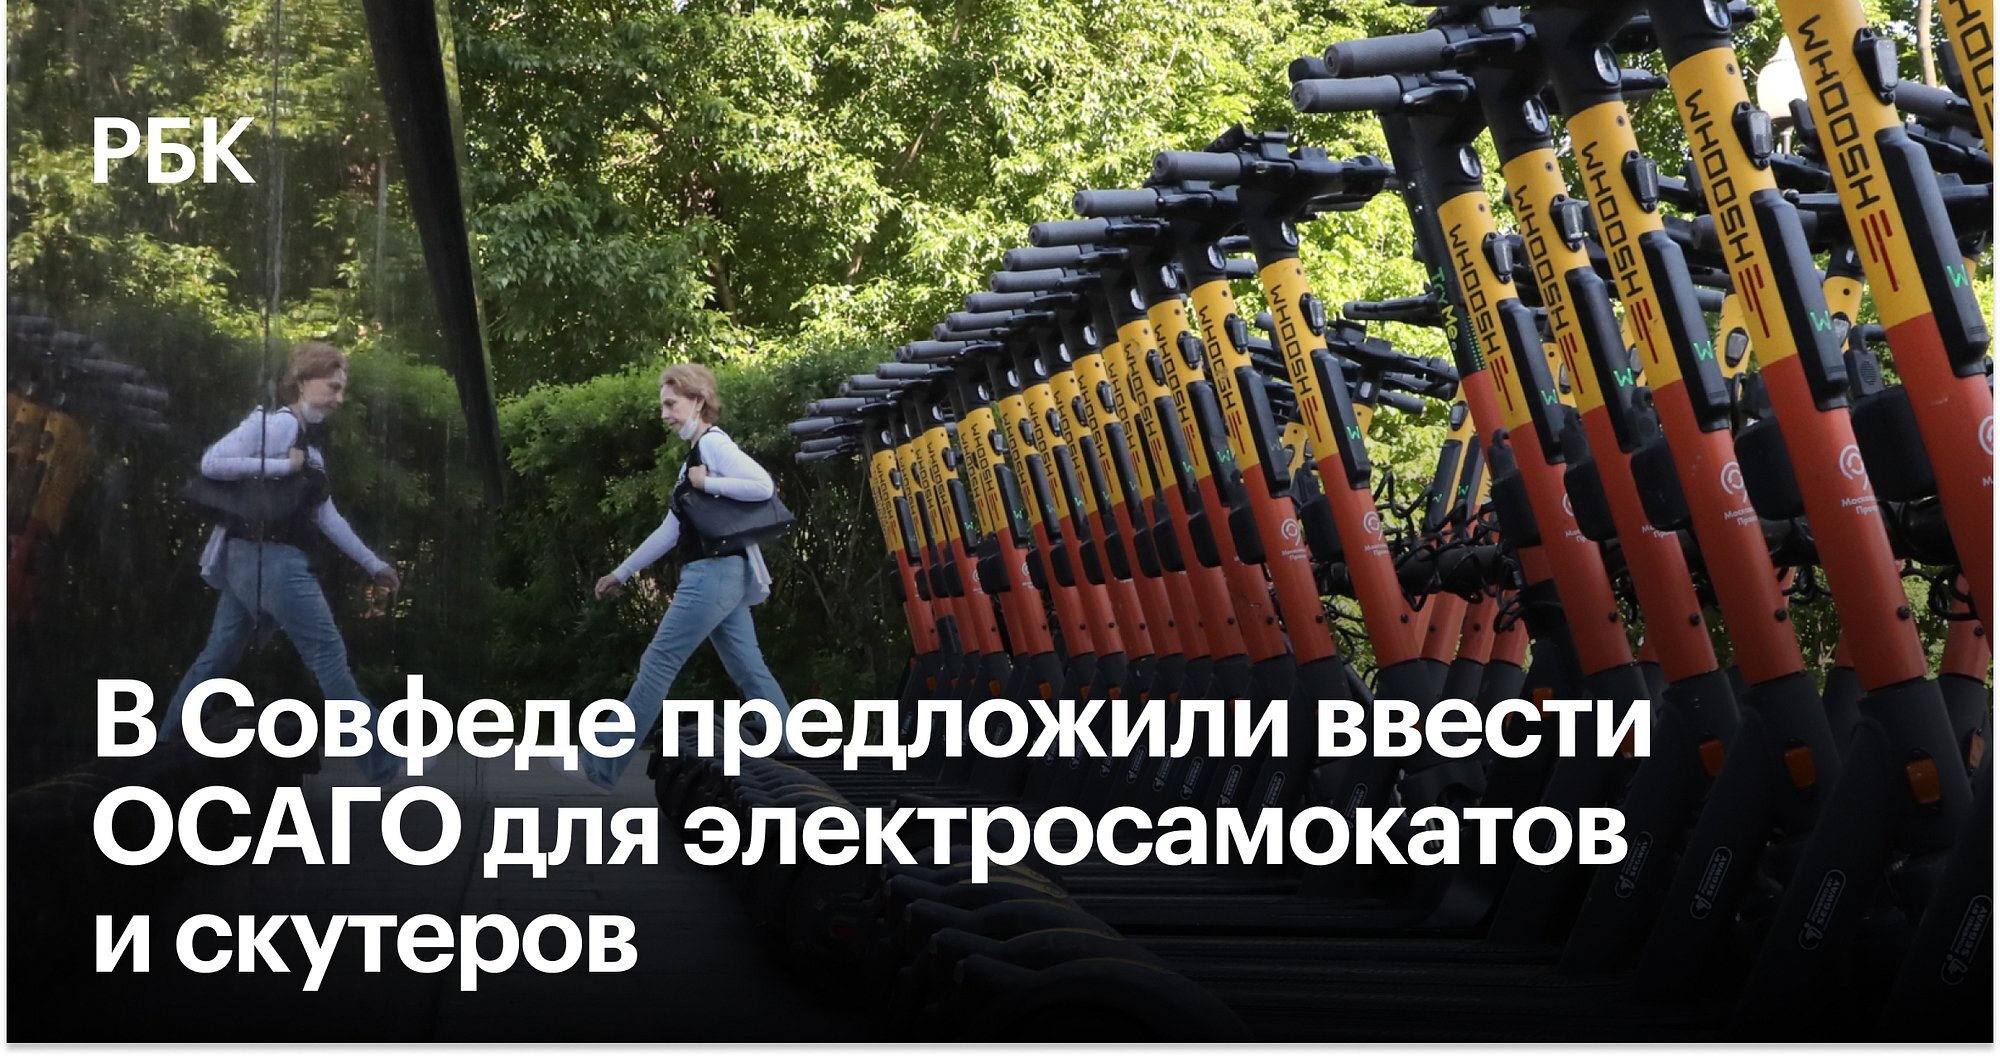 The Federation Council proposed to introduce OSAGO for electric scooters and scooters - Politics, news, Society, Transport, Ministry of Internal Affairs, Ministry of Transport, OSAGO, Ministry of Education, Minors, Electric scooter, Crash, Traffic police, RBK, Scooter, Federation Council